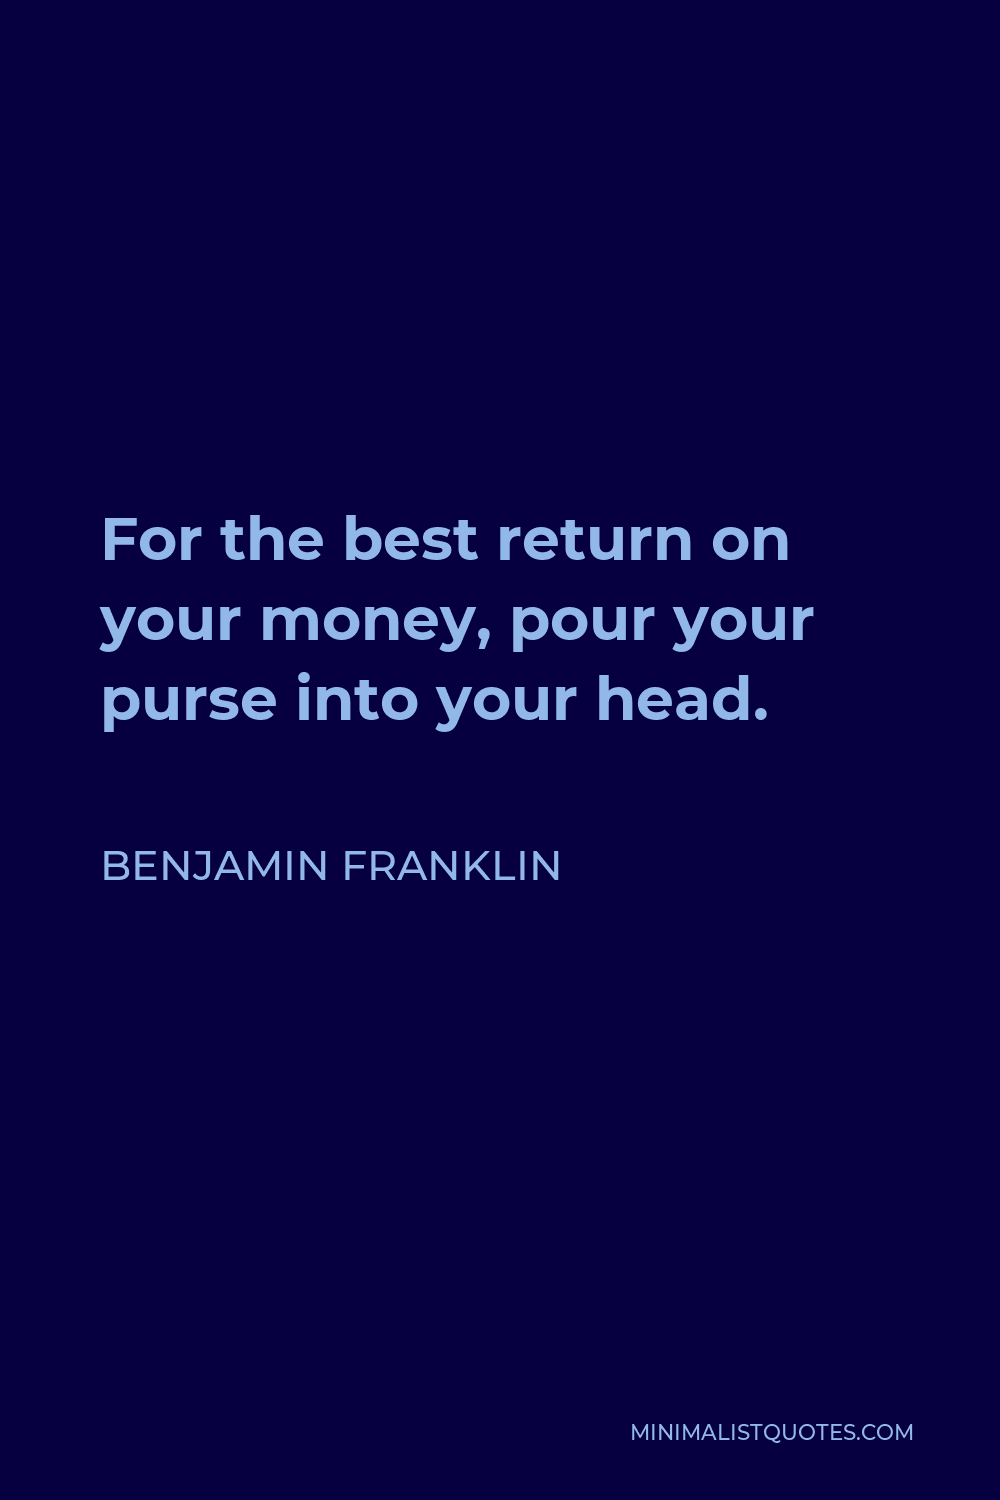 Benjamin Franklin Quote - For the best return on your money, pour your purse into your head.